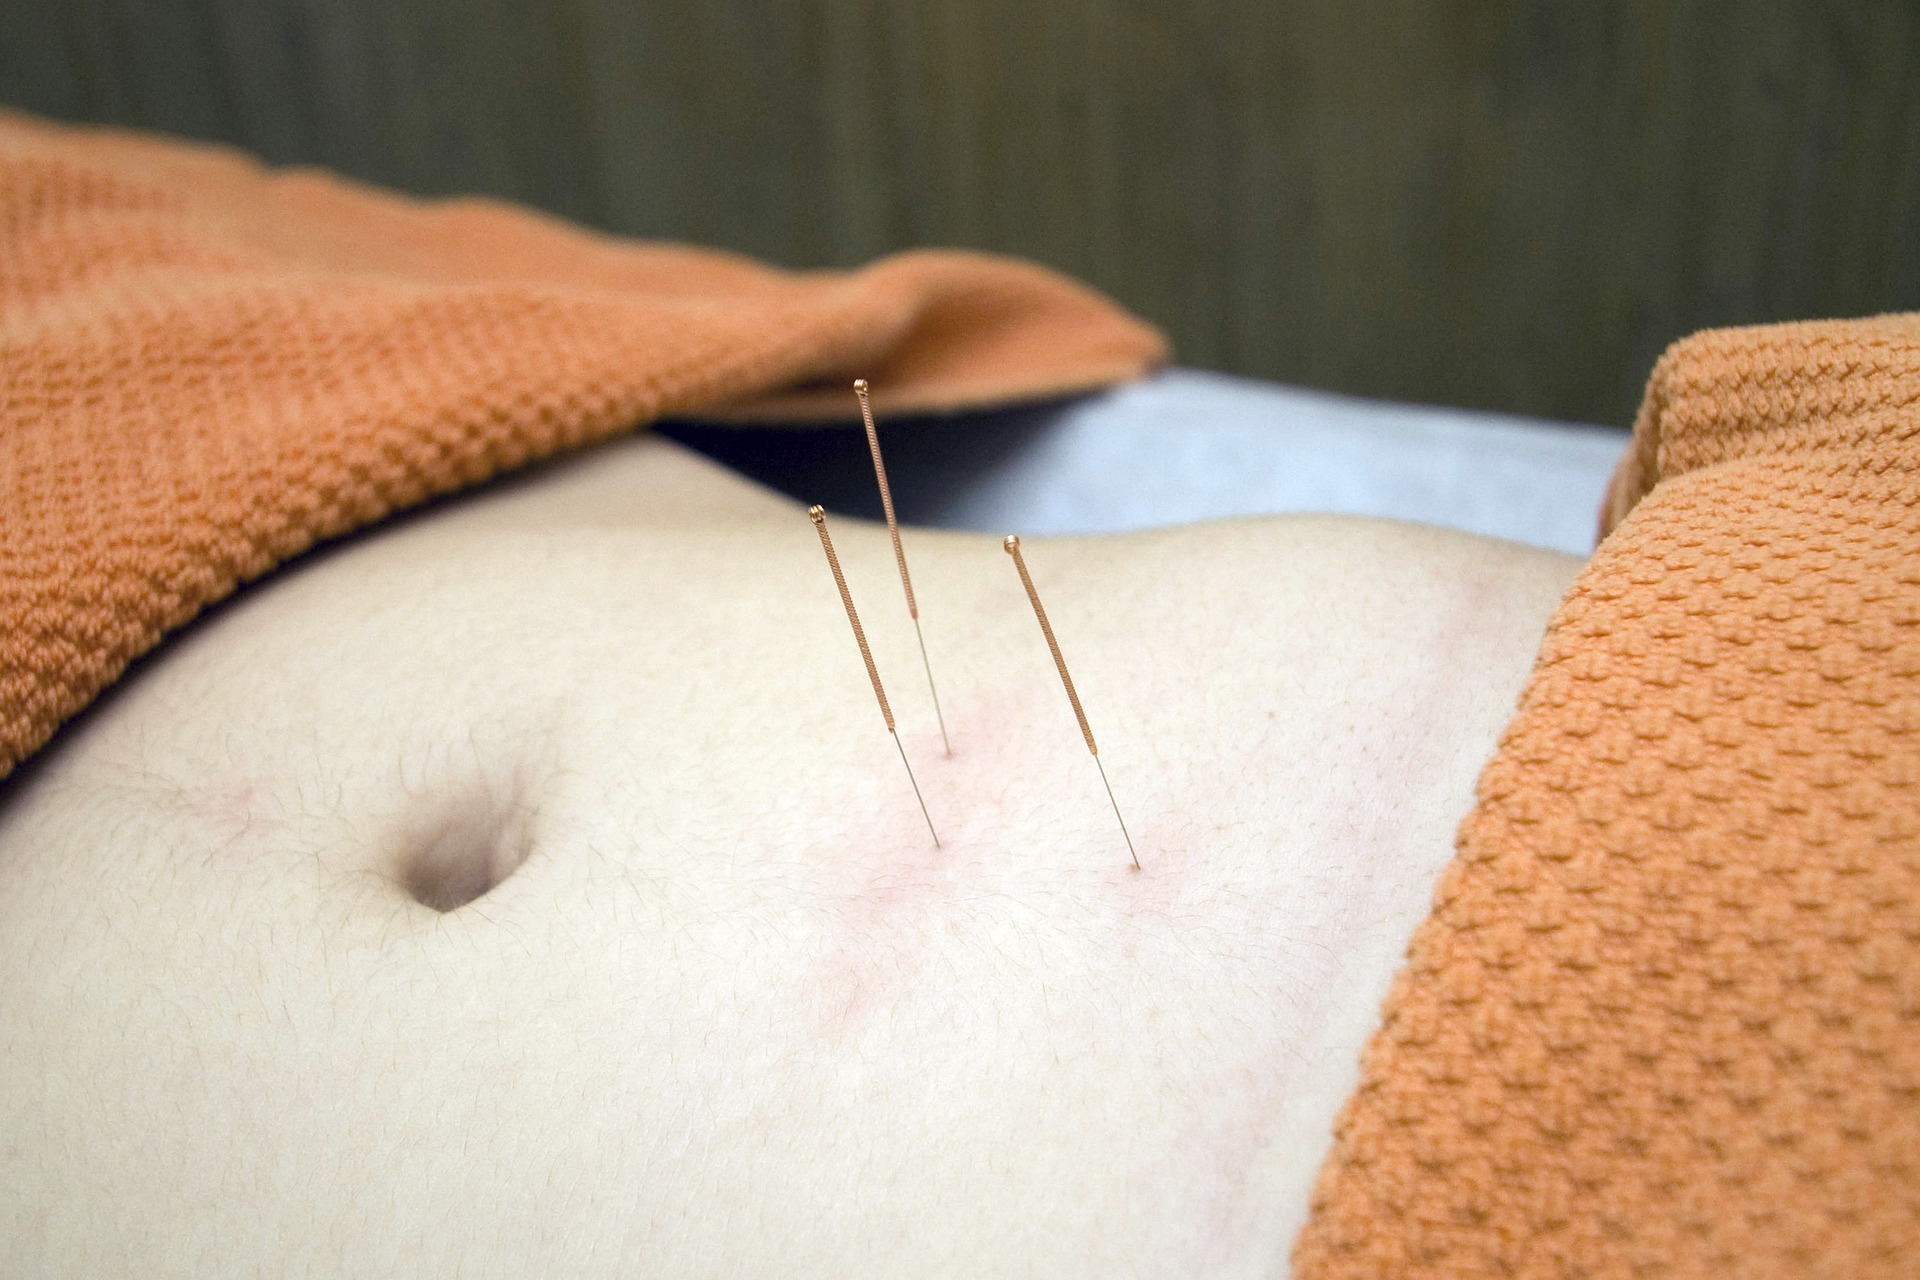 Acupuncture for fertility